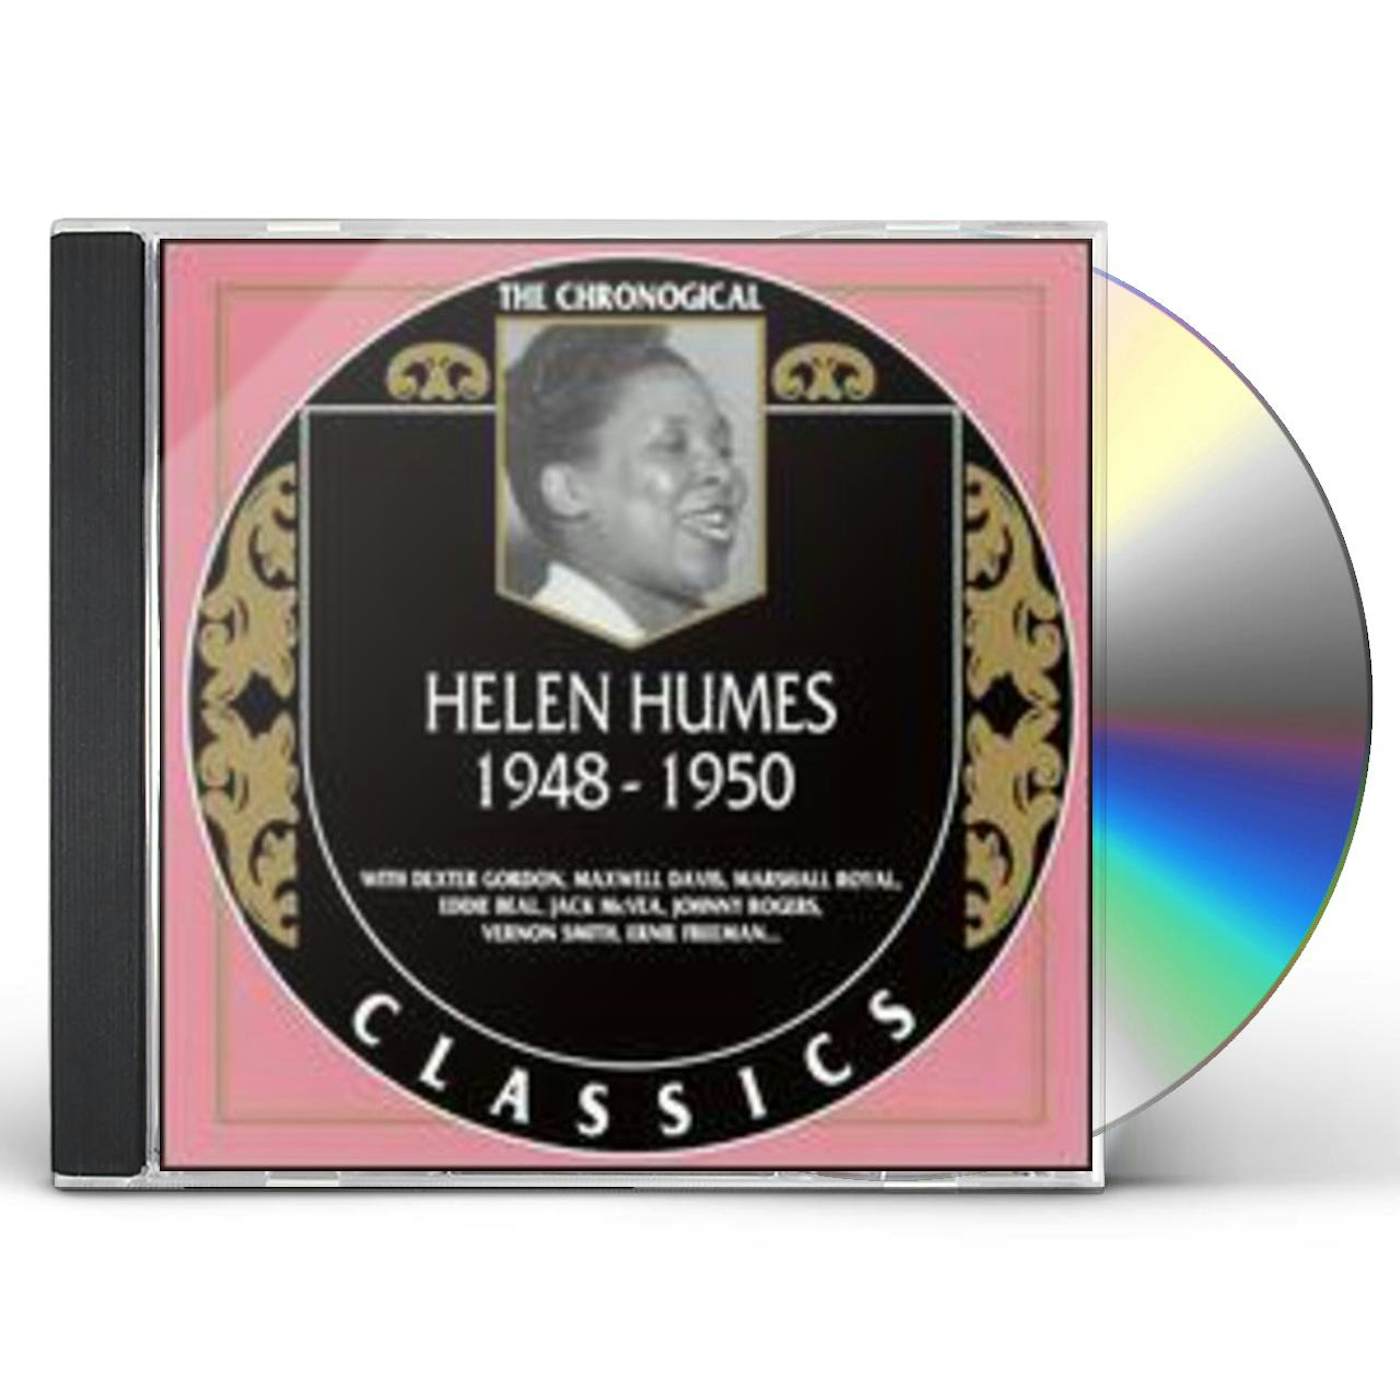 Helen Humes 1948-1950 CD